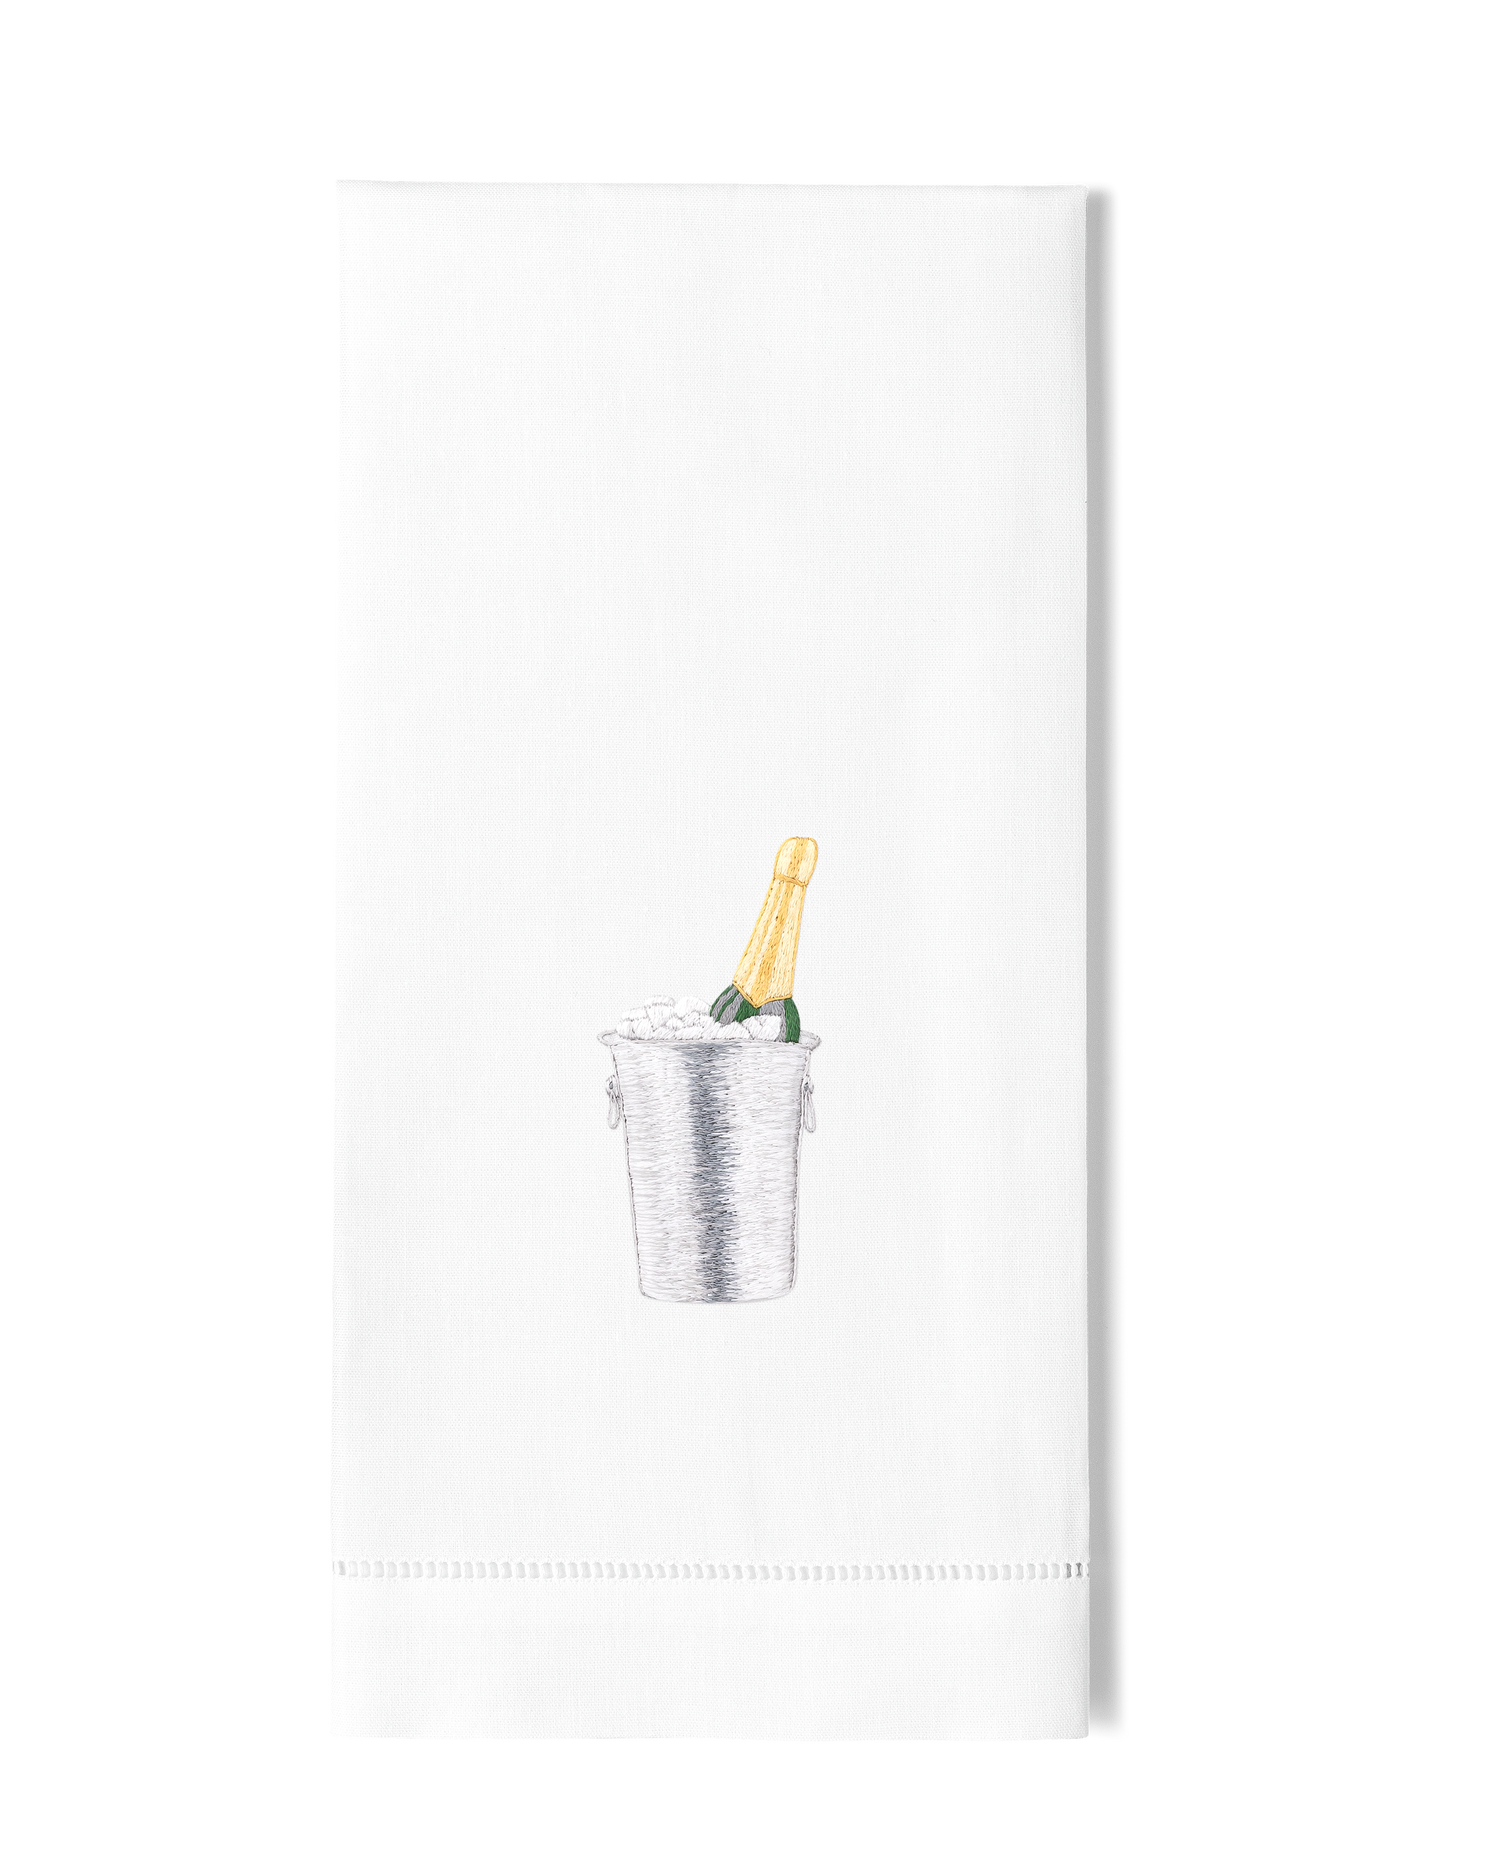 A white hand towel with a hemstitch. A champagne bottle in a silver ice bucket is embroidered in the center.